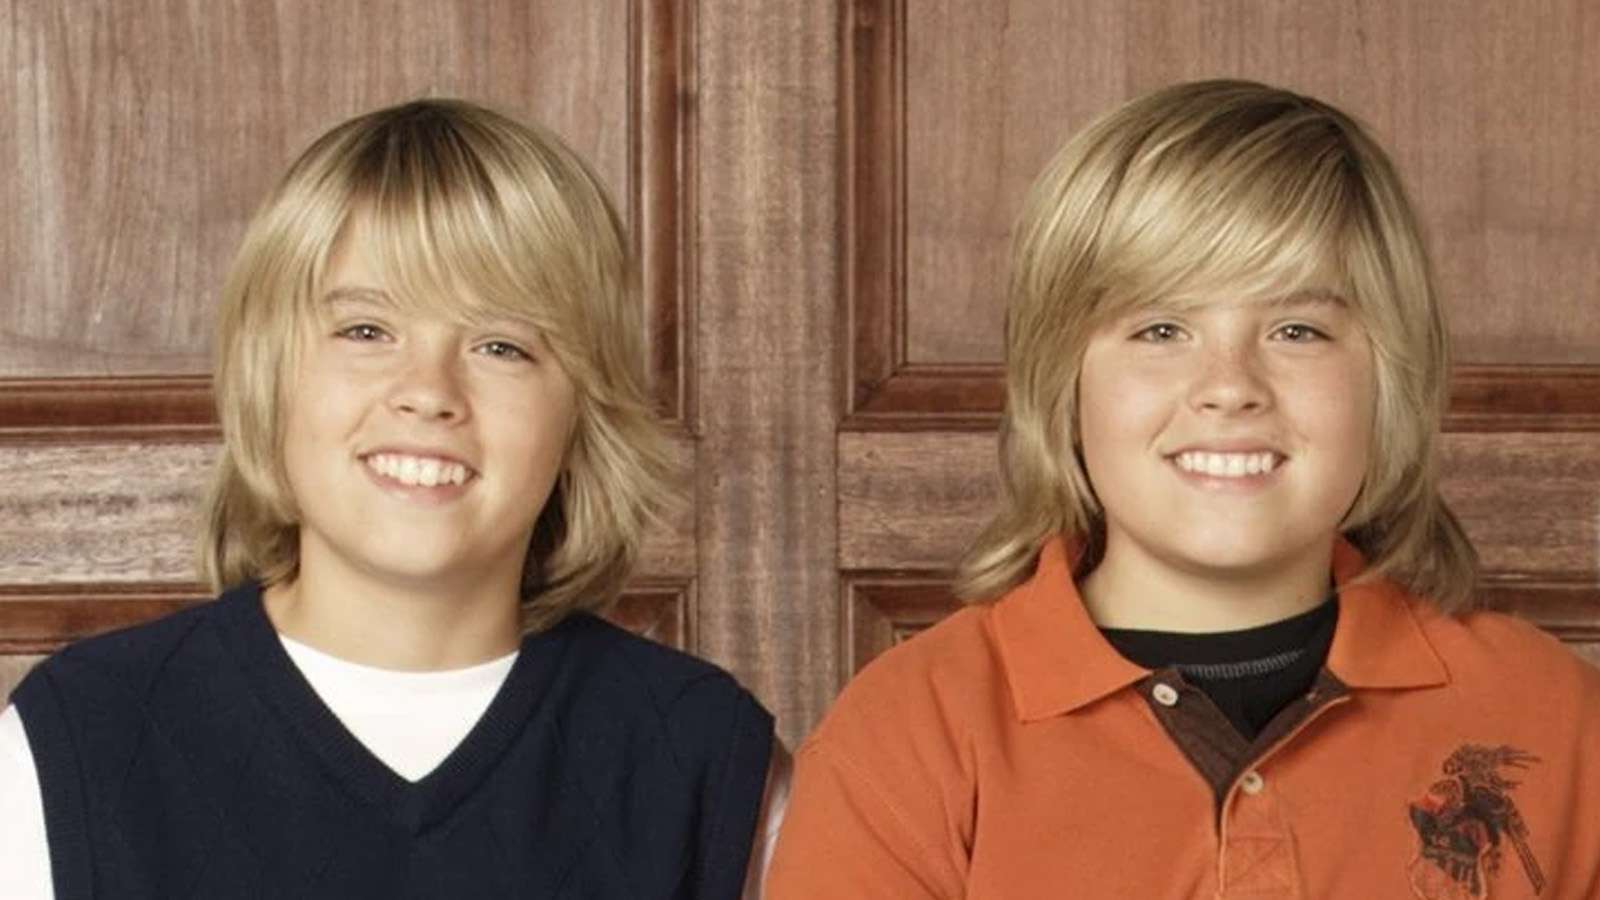 Why are The Suite Life Of Zack And Cody fans preparing to celebrate this November 16